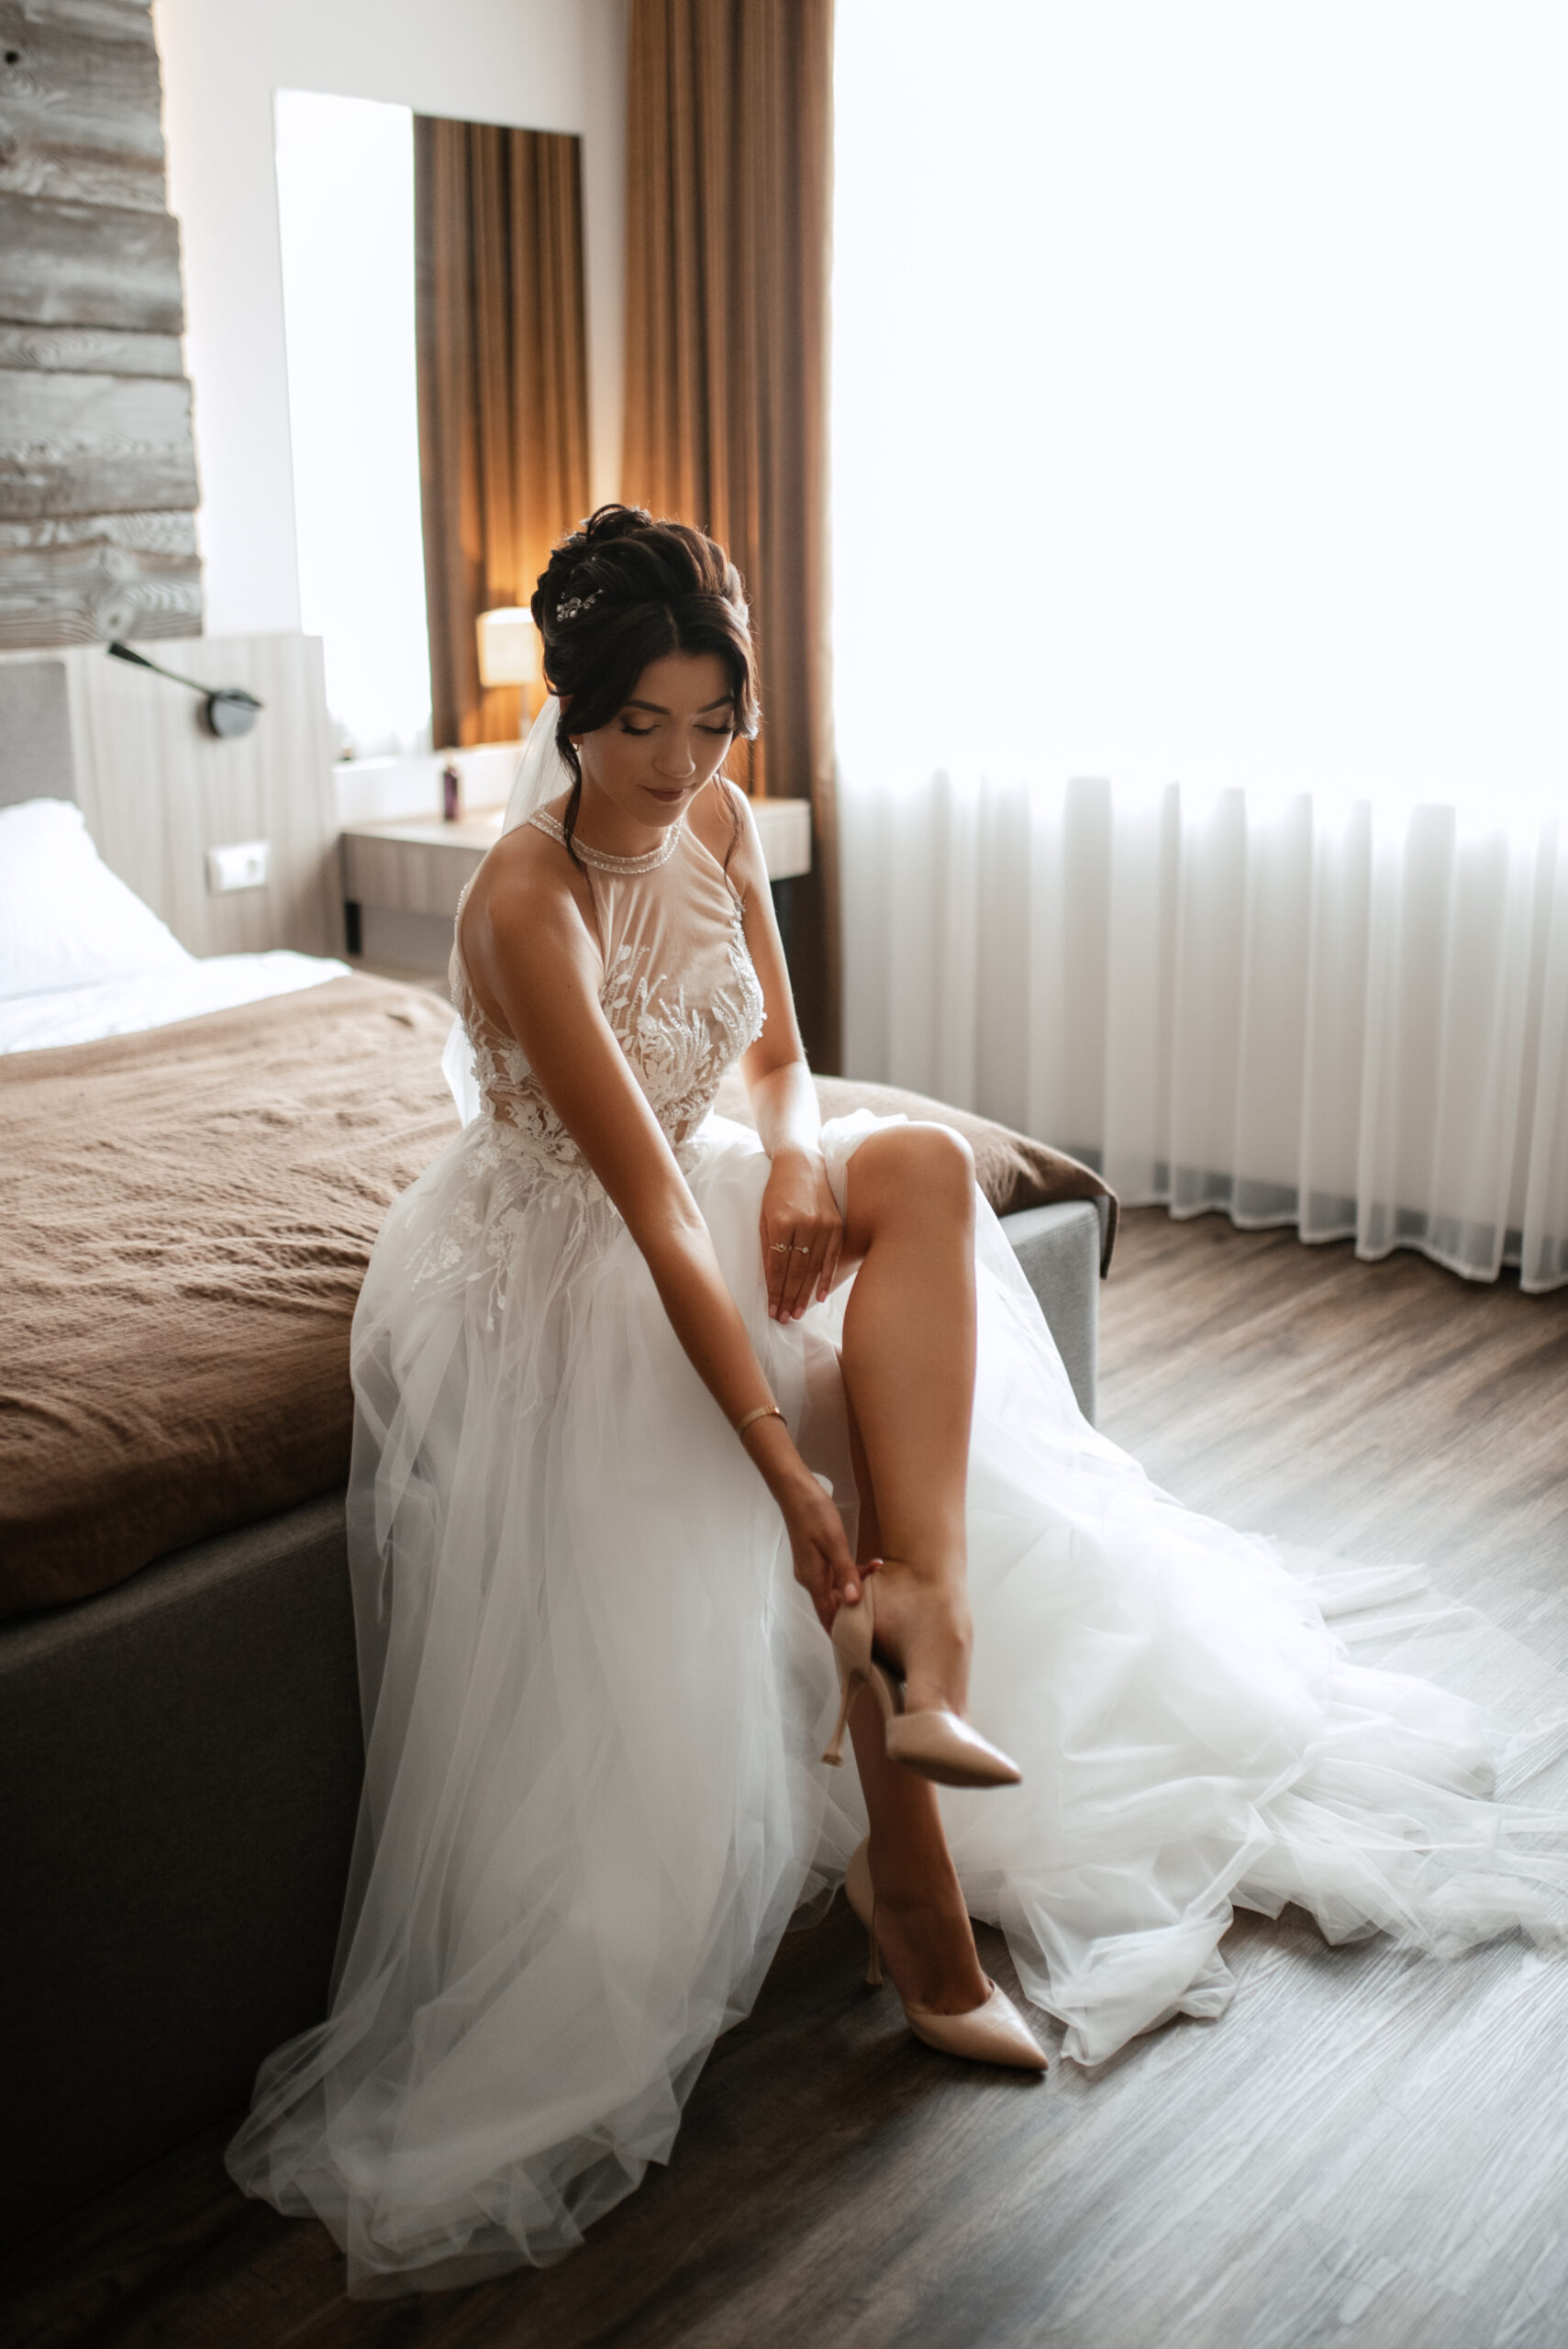 Accessorizing Your Wedding Dress From Veils to Shoes